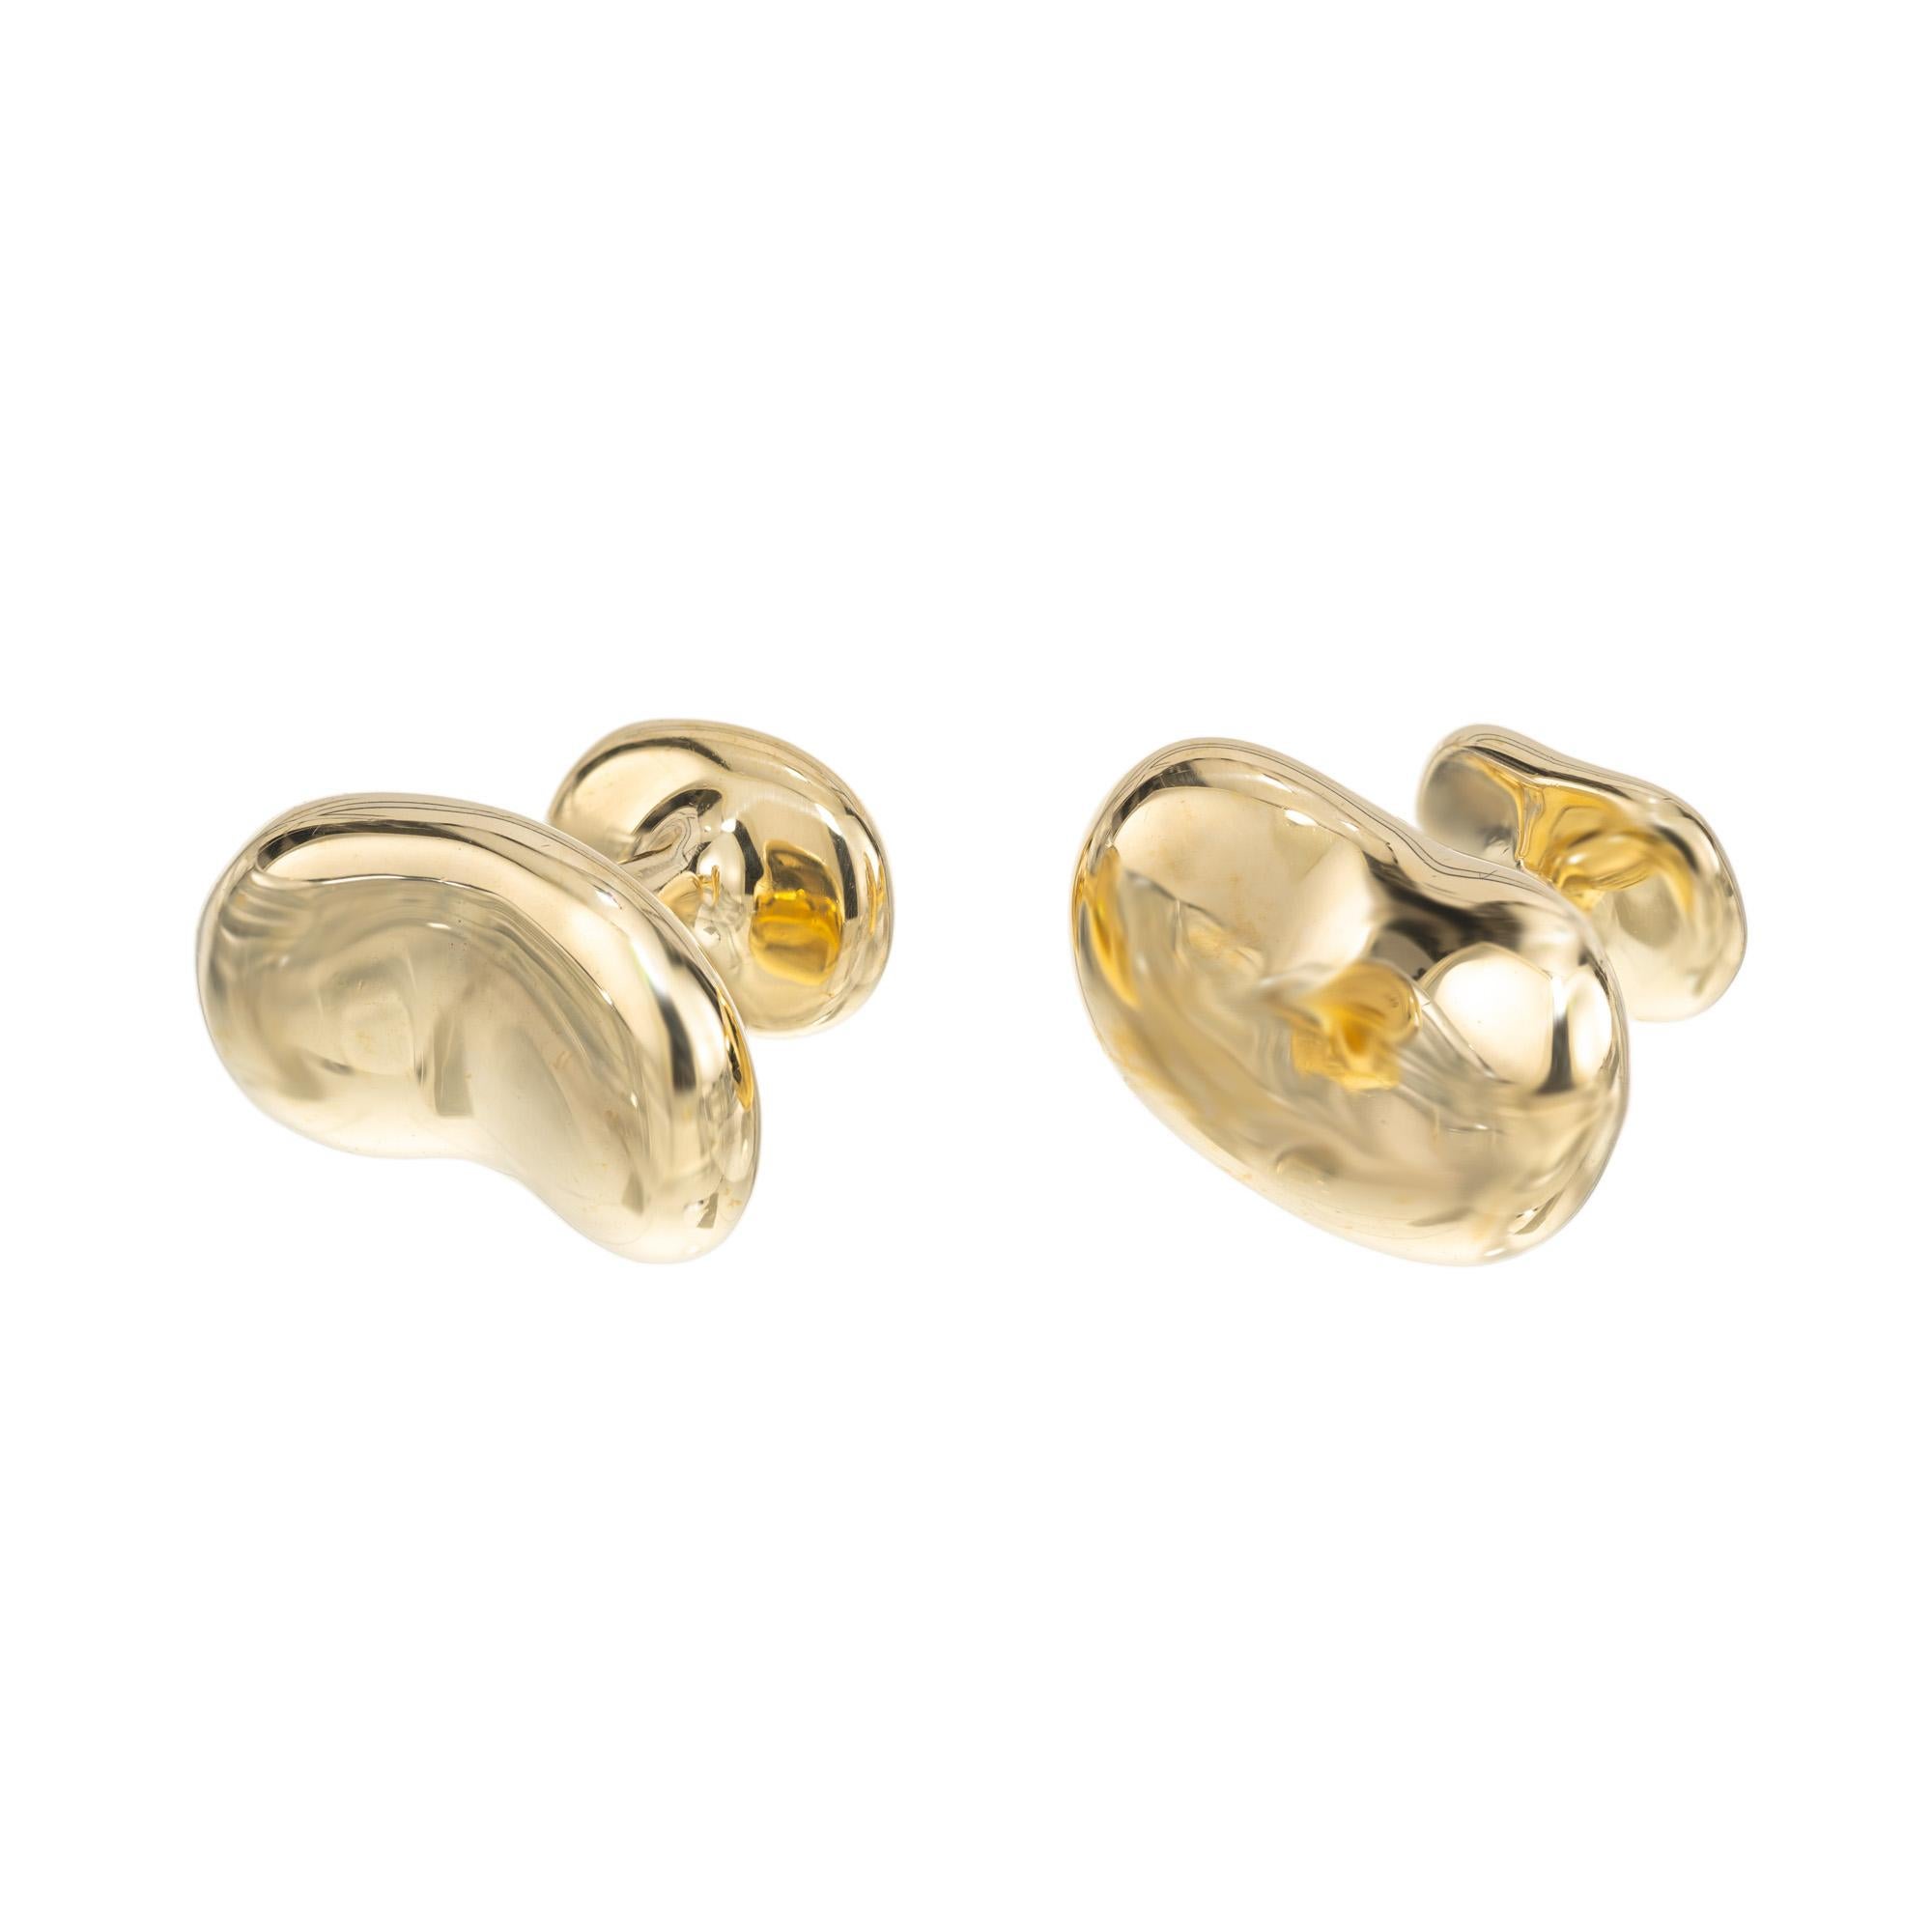 Tiffany & Co Elsa Peretti Yellow Gold Bean Cufflinks  In Good Condition For Sale In Stamford, CT